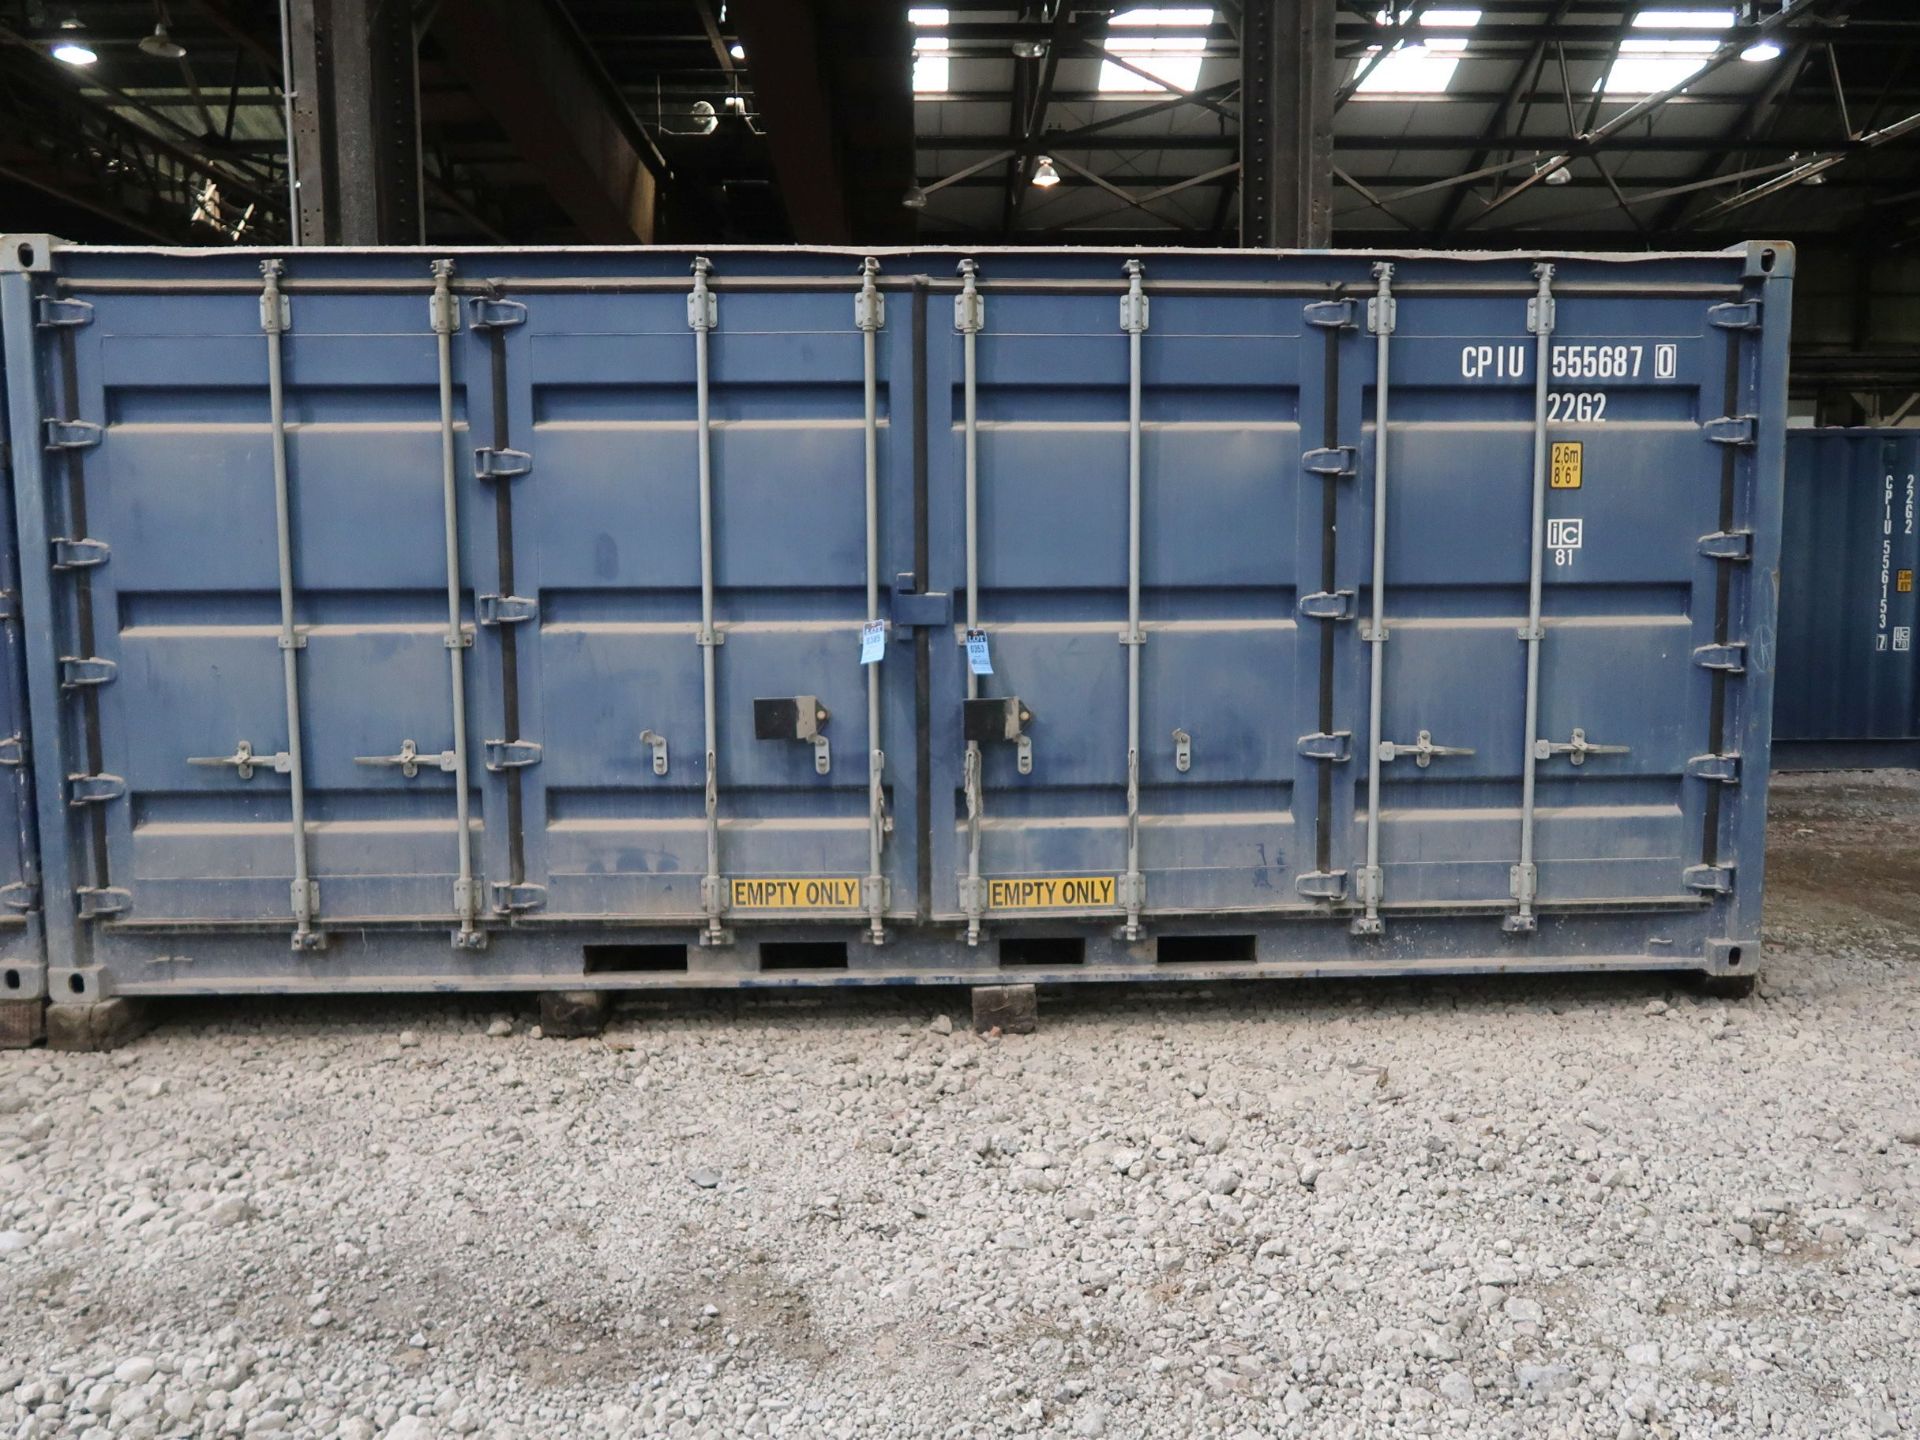 8' X 20' CONTAINER PROVIDER INTL CONEX STORAGE CONTAINER WITH STANDARD END DOOR AND SIDE DOORS, 1094